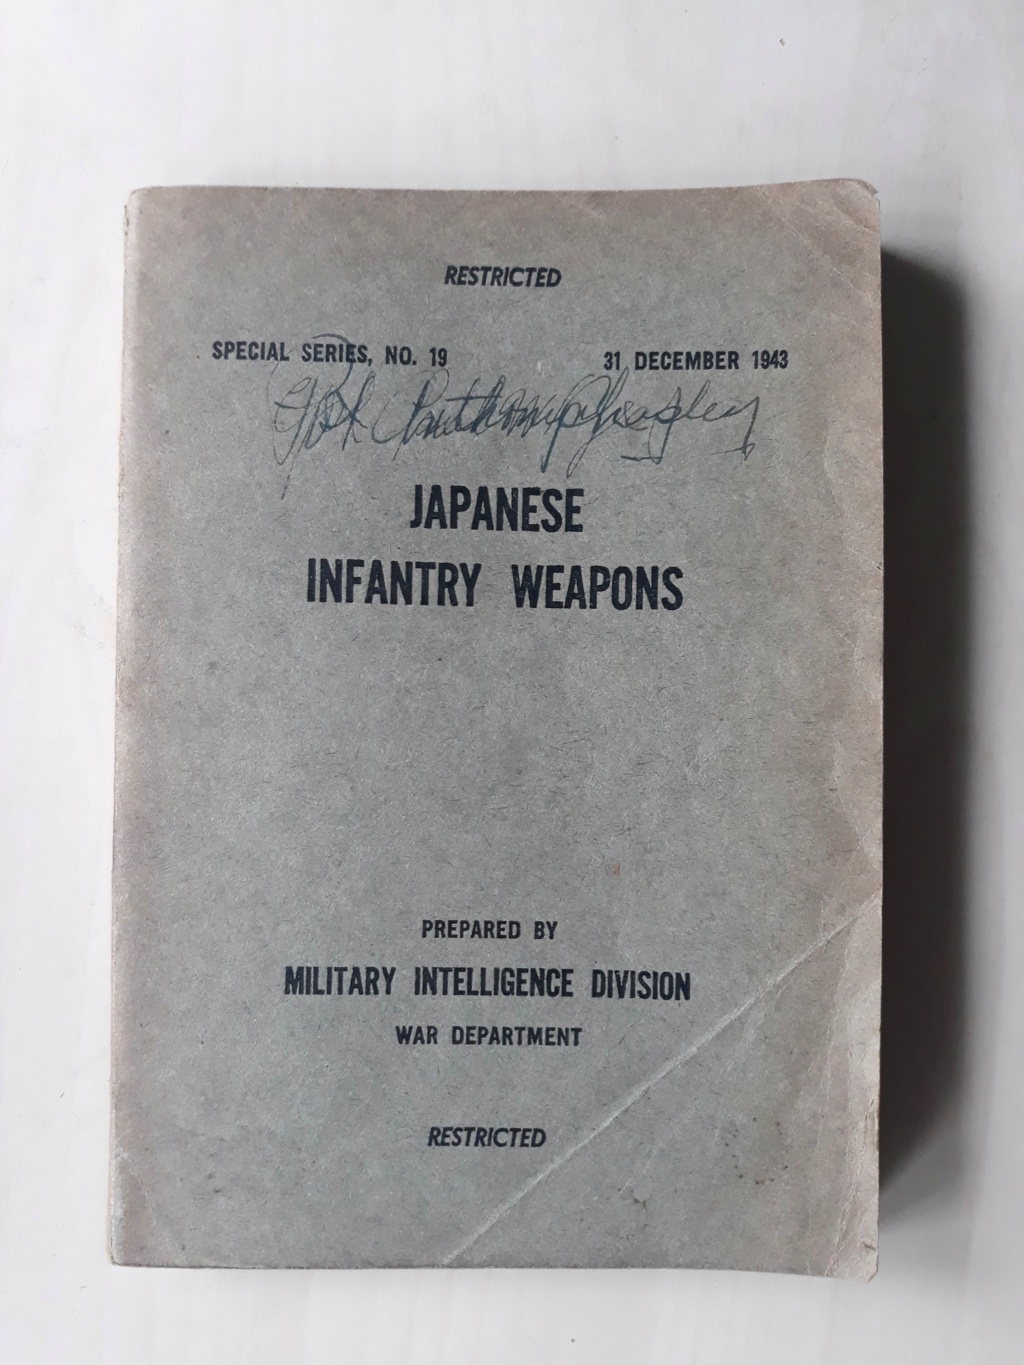 Manuel US 1943 "Japanese Infantry Weapons" 20210510